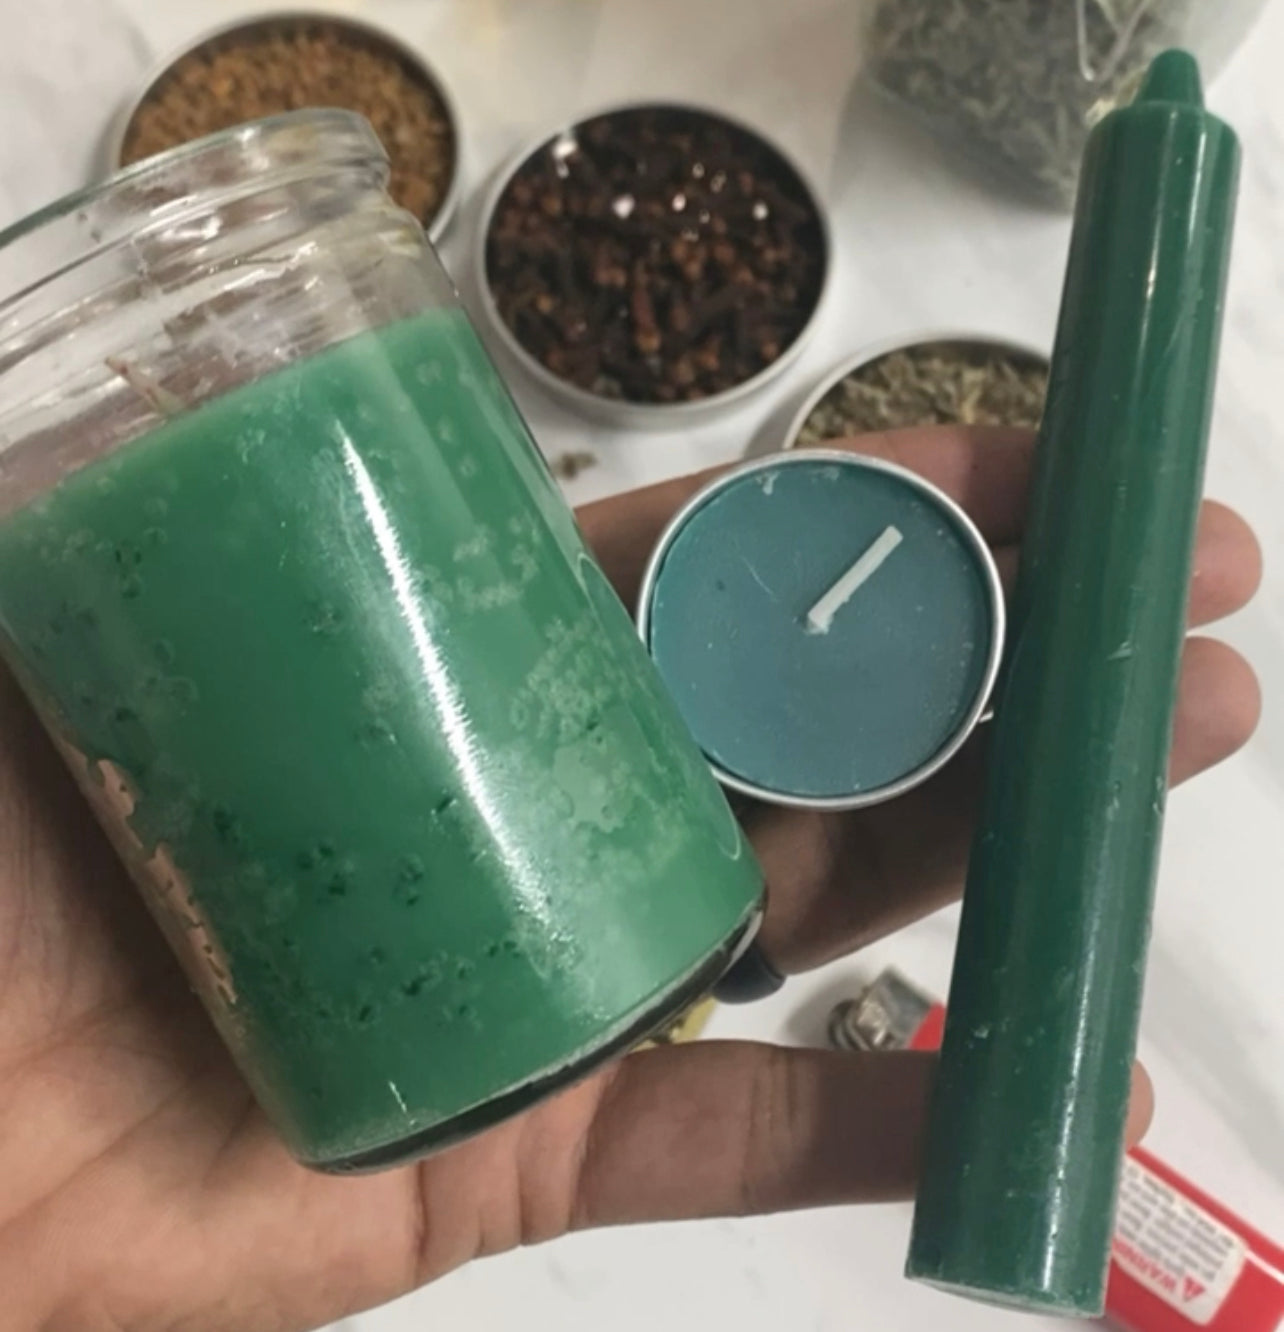 Single Color Candles